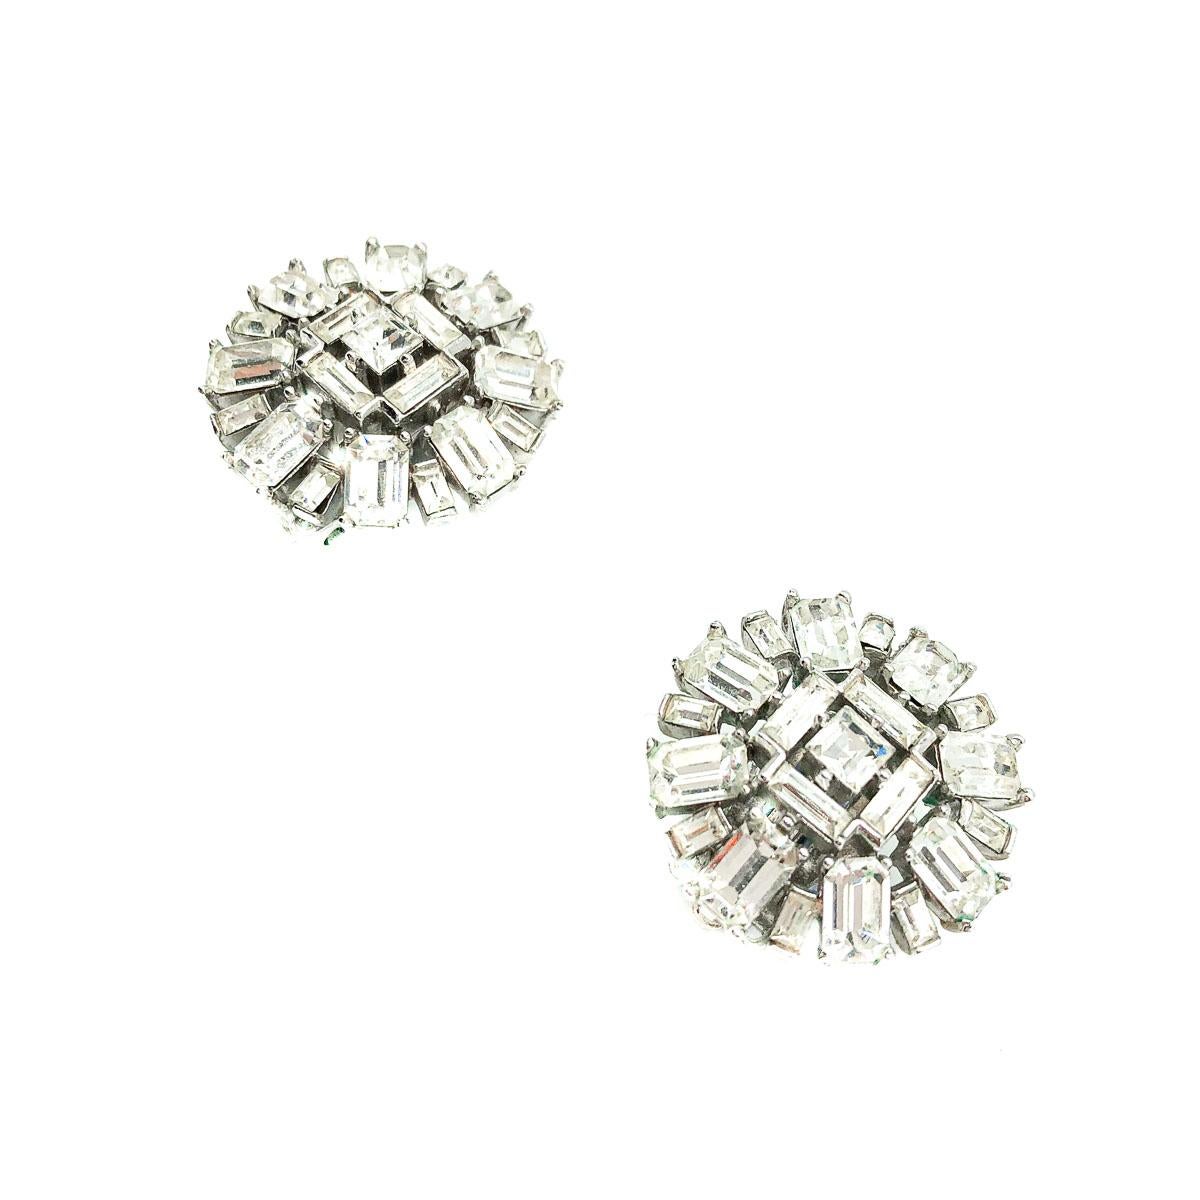 Vintage Crown Trifari Deco Earrings. A stunning example of mid century Crown Trifari craftsmanship. Featuring a fabulous array of baguette cut crystal stones in a rhodium plated metal setting. Trifari are undoubtedly America's most prolific costume